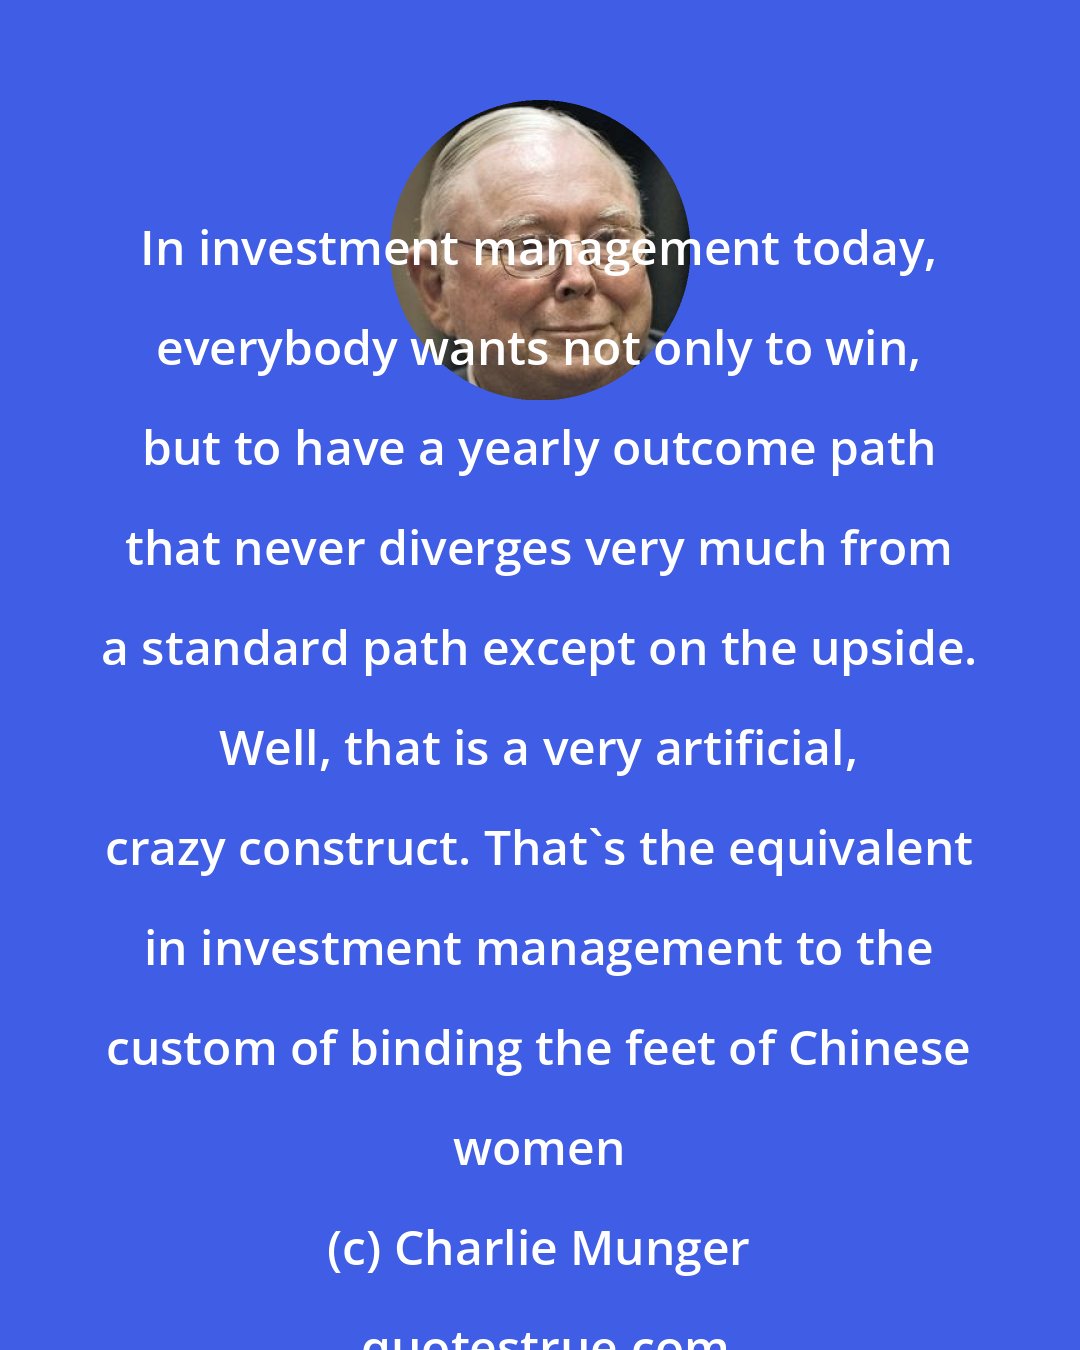 Charlie Munger: In investment management today, everybody wants not only to win, but to have a yearly outcome path that never diverges very much from a standard path except on the upside. Well, that is a very artificial, crazy construct. That's the equivalent in investment management to the custom of binding the feet of Chinese women